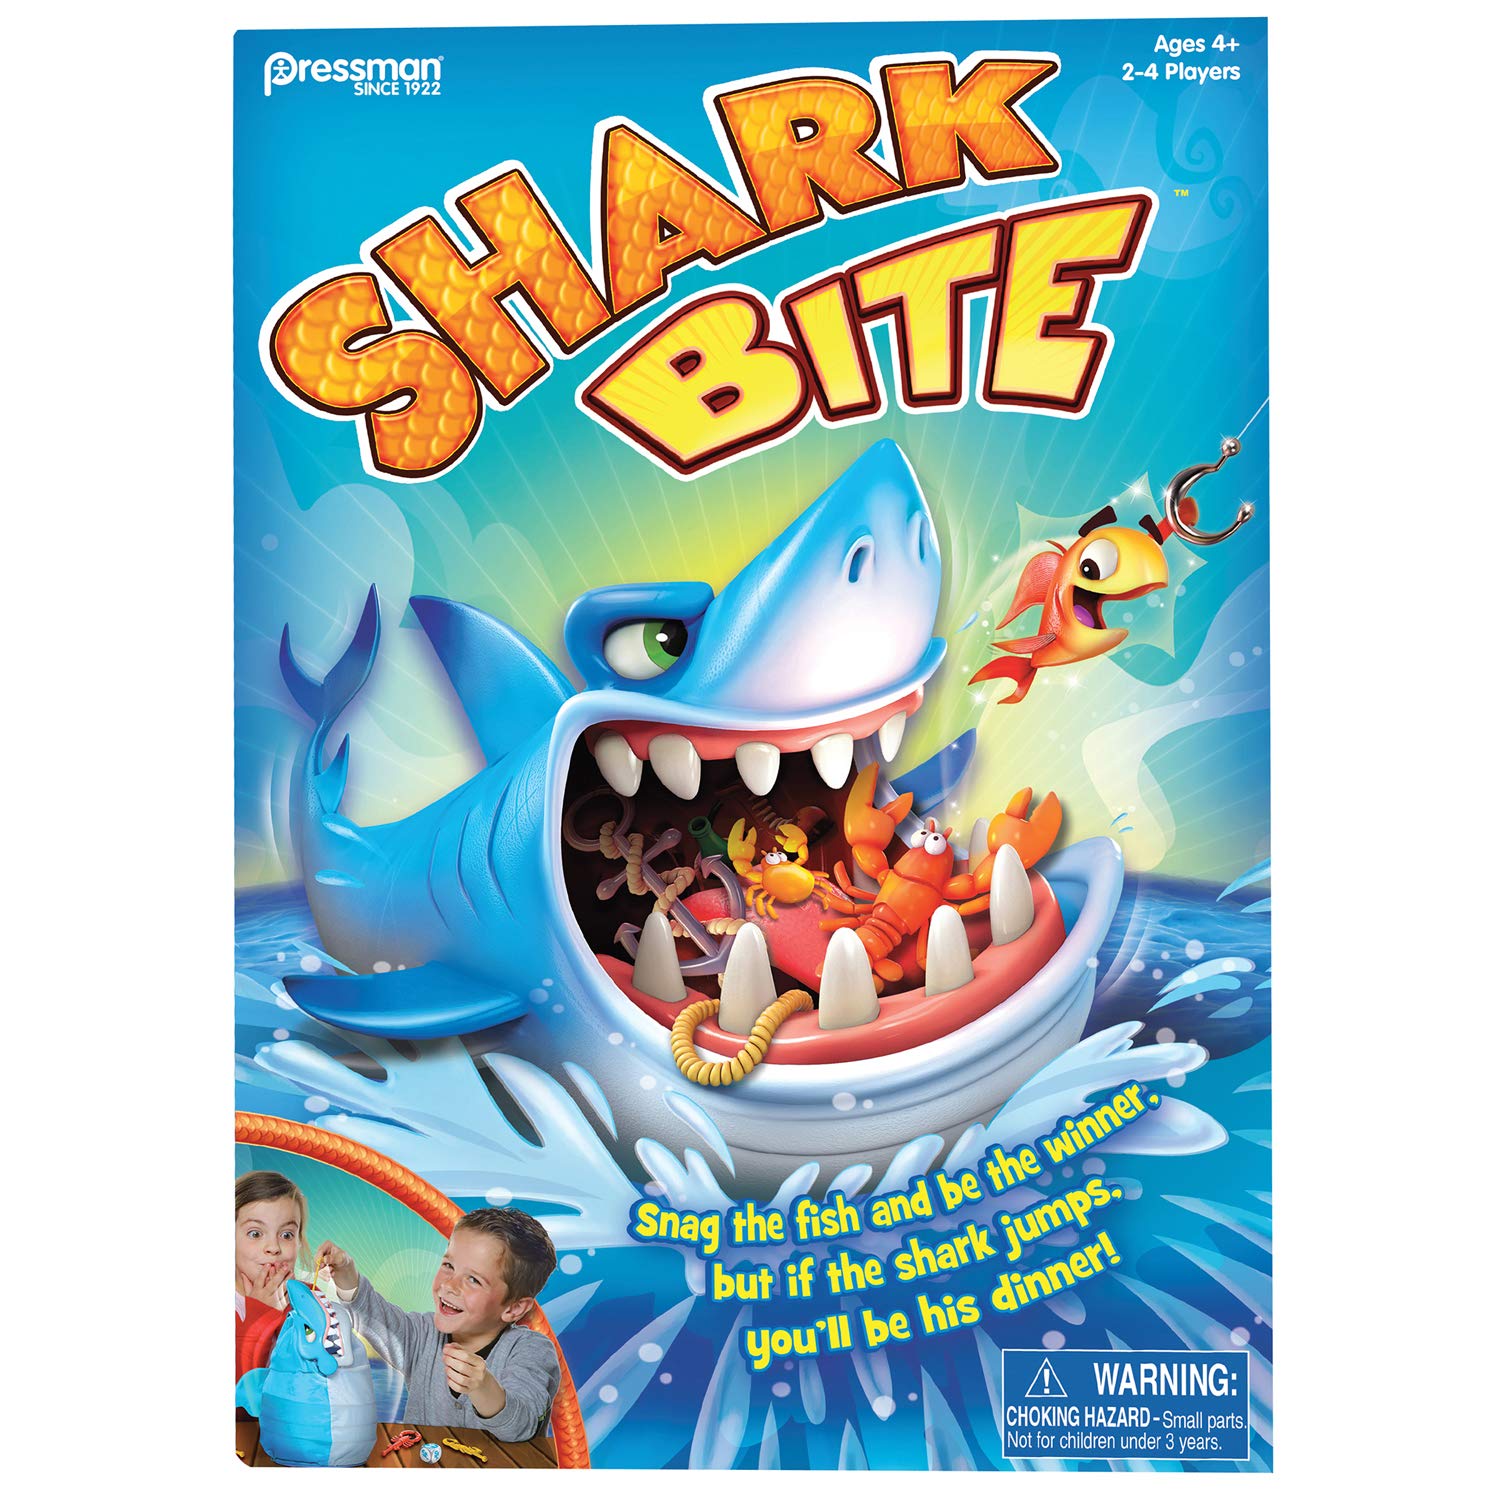 Shark Bite -- Roll the Die and Fish for Colorful Sea Creatures Before the Shark Bites Game! by Pressman Blue Sky, 5